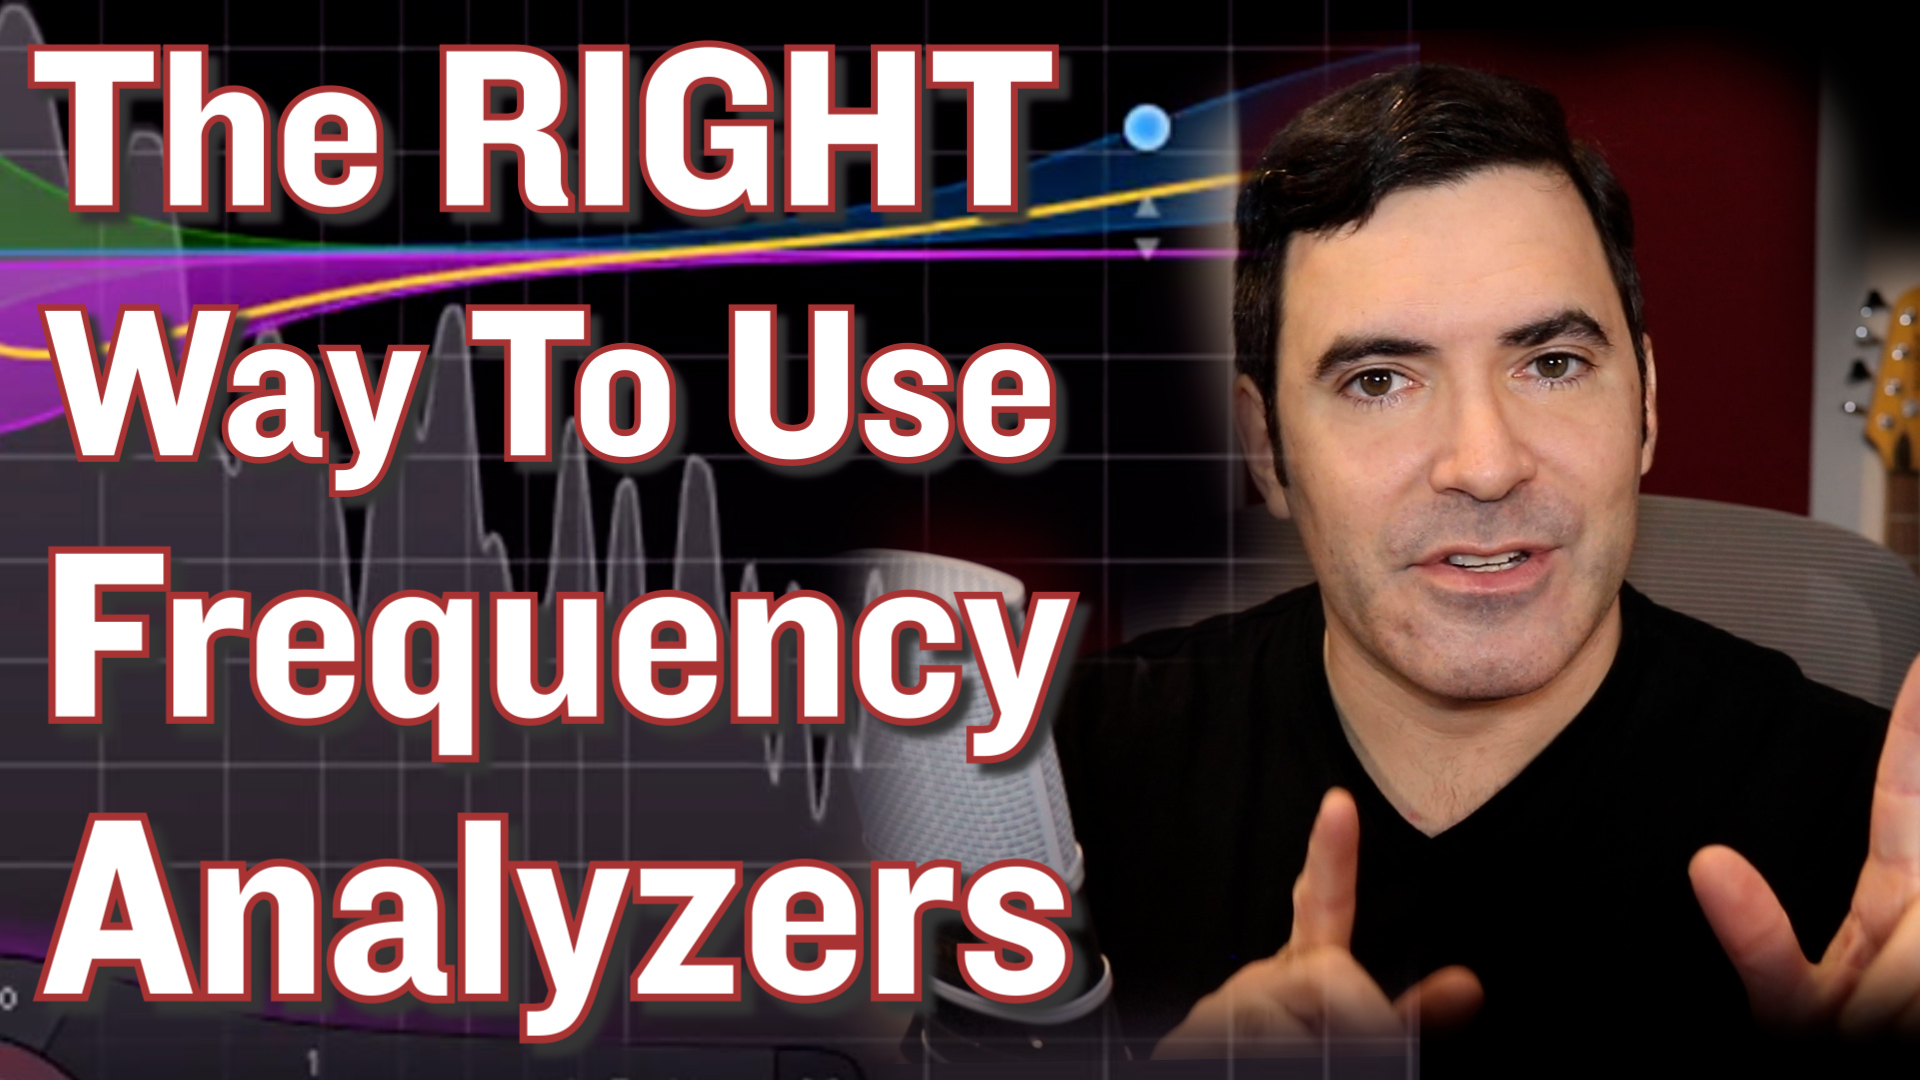 How to Use Frequency Analyzers (The Right Way)